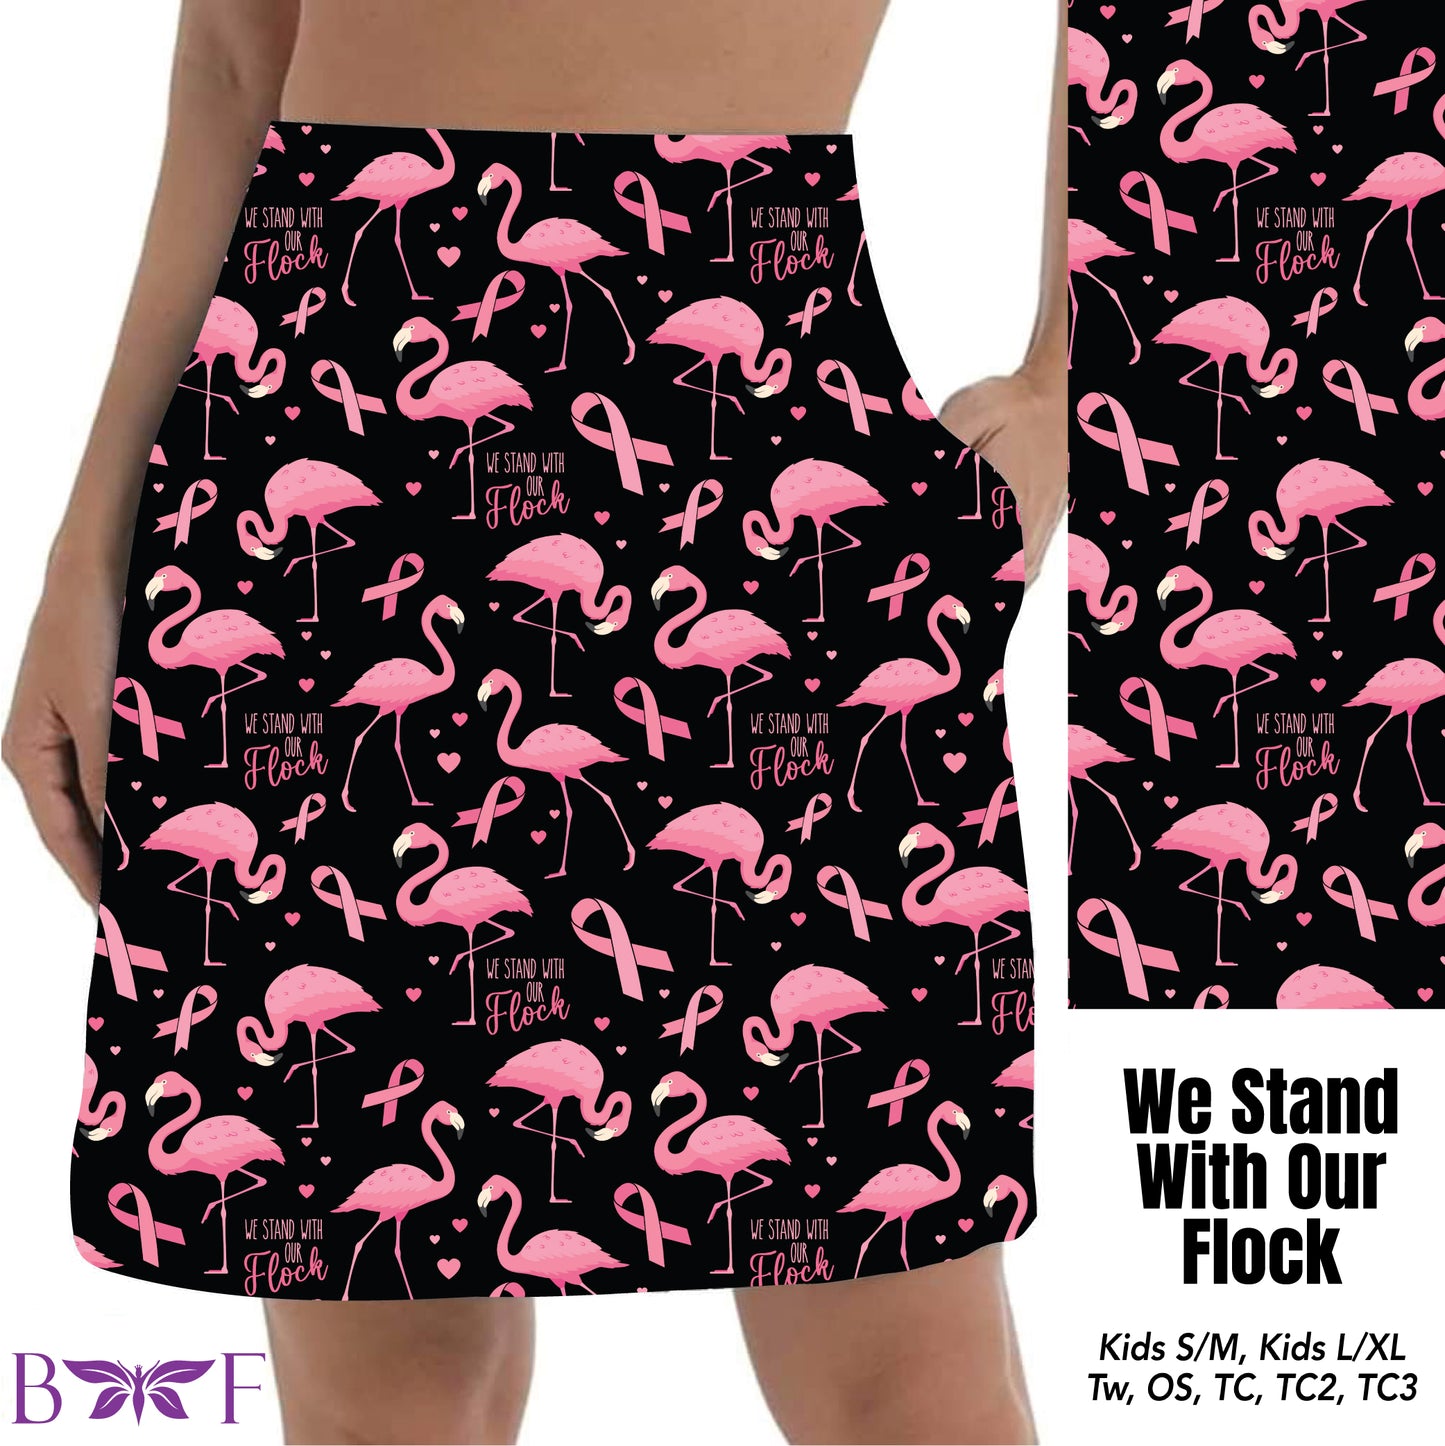 We stand with our flock preorder#0515